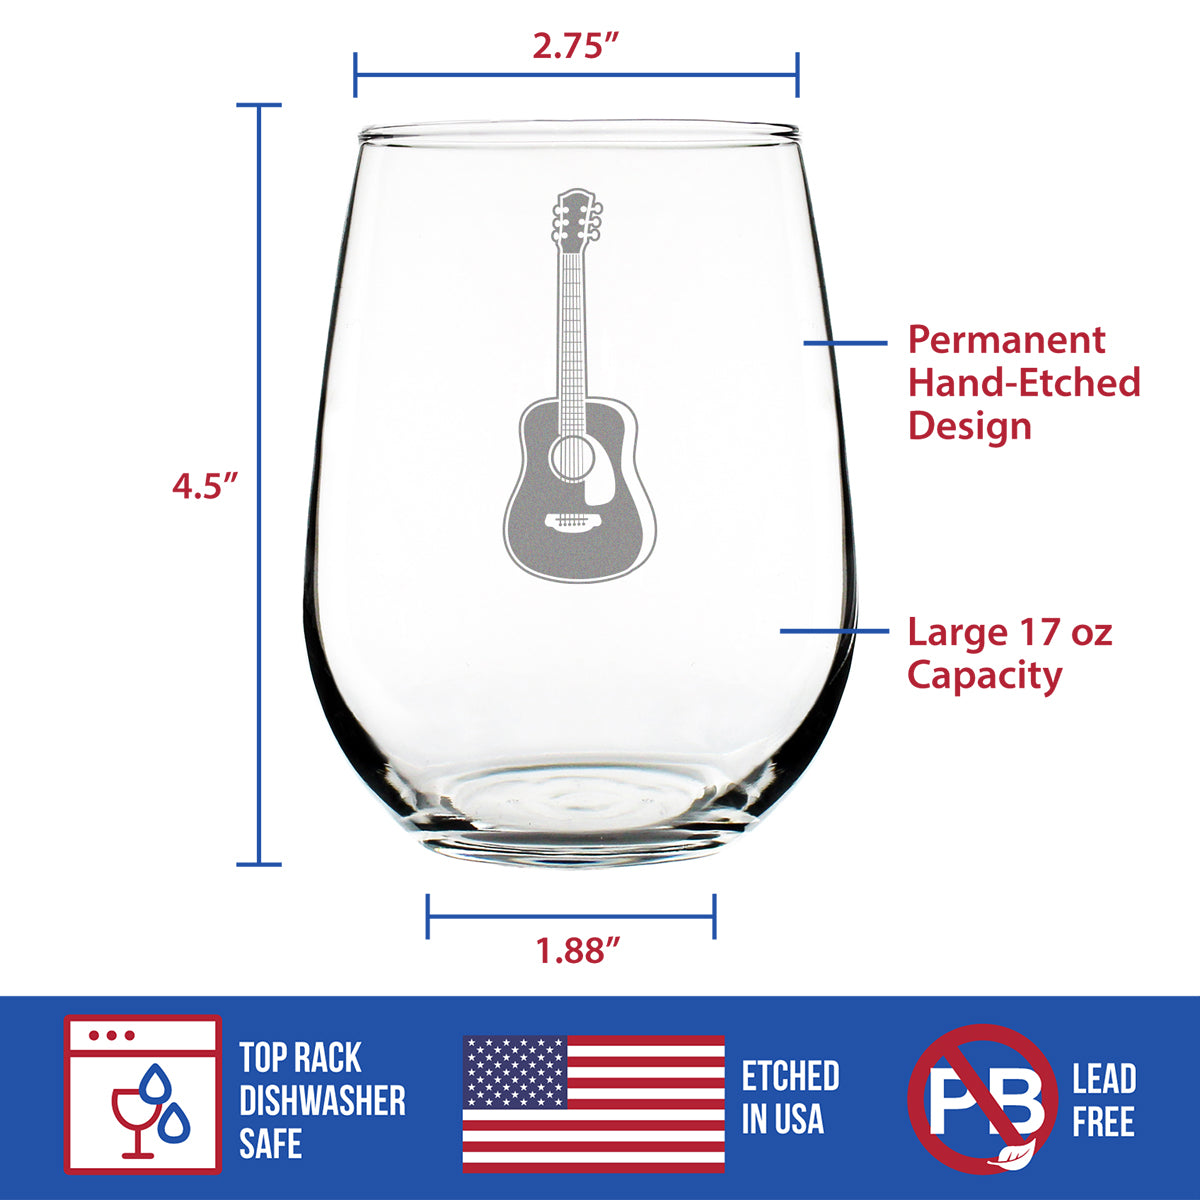 Guitar - Stemless Wine Glass - Fun Musician Gifts and Musical Accessories for Women and Men - Large 17 Oz Glasses